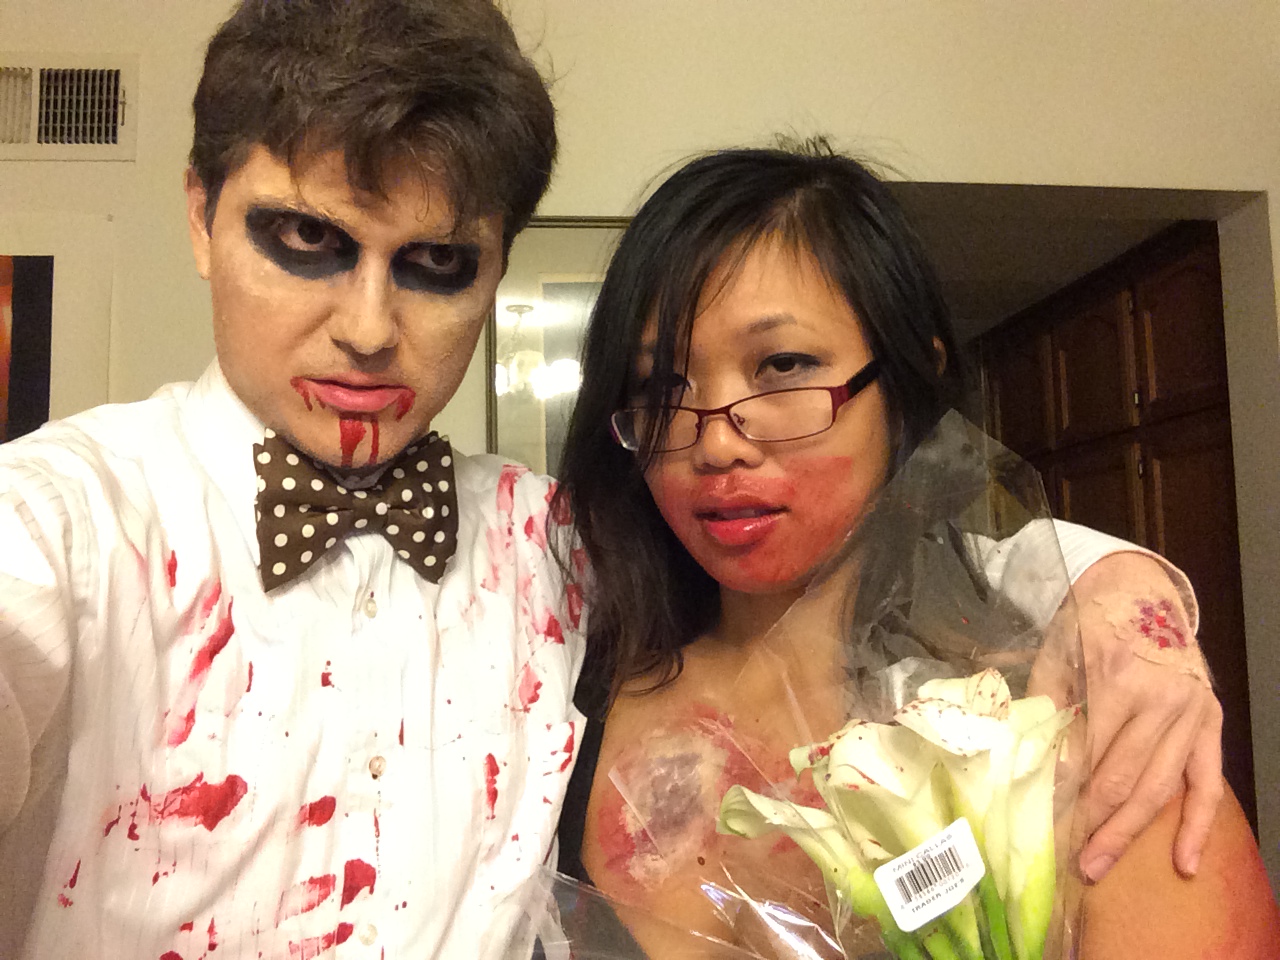 Zombie at Prom Night of the Living Dead